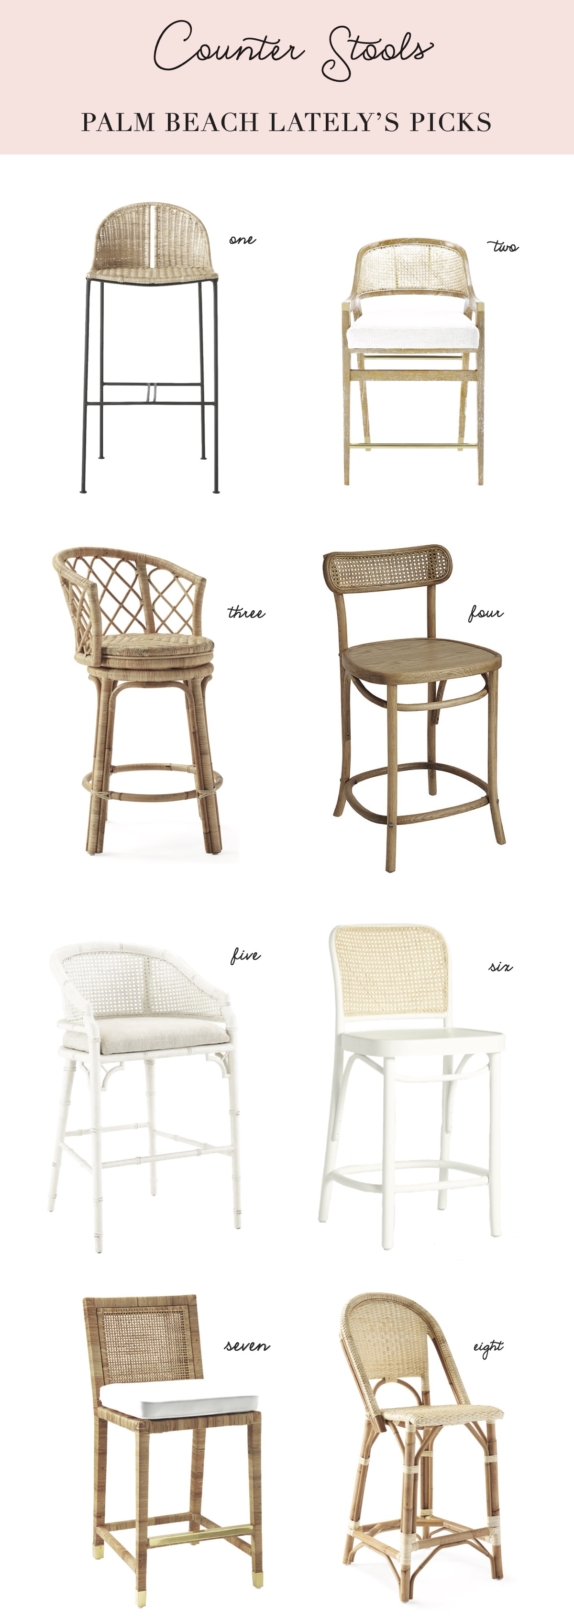 Home Rattan And Cane Counter Stools, Pineapple Back Bar Stools With Arms